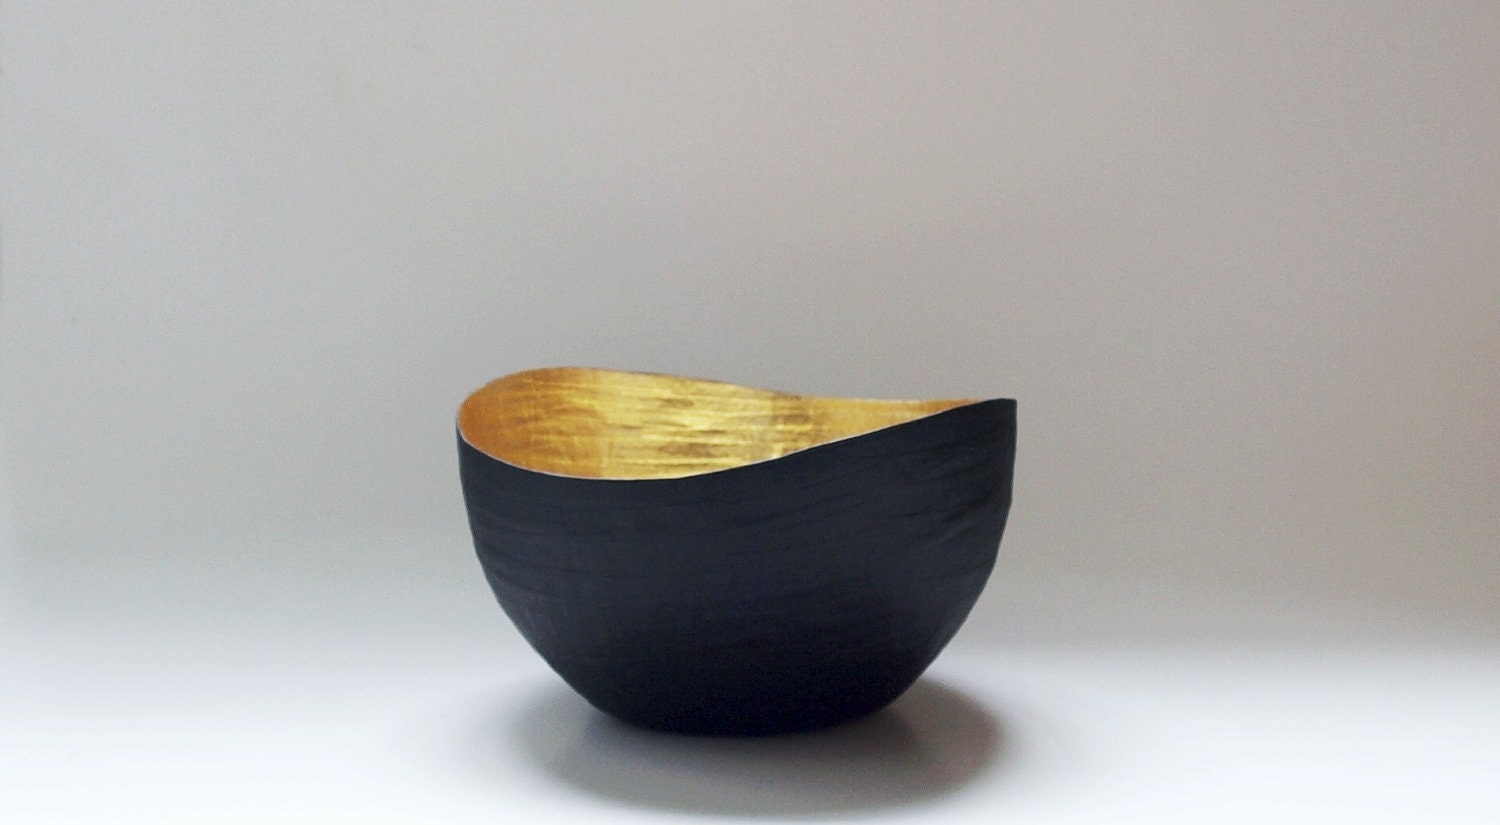 Paper Mache Vessel in Black and Gold - The Wavy - Made to order - etco